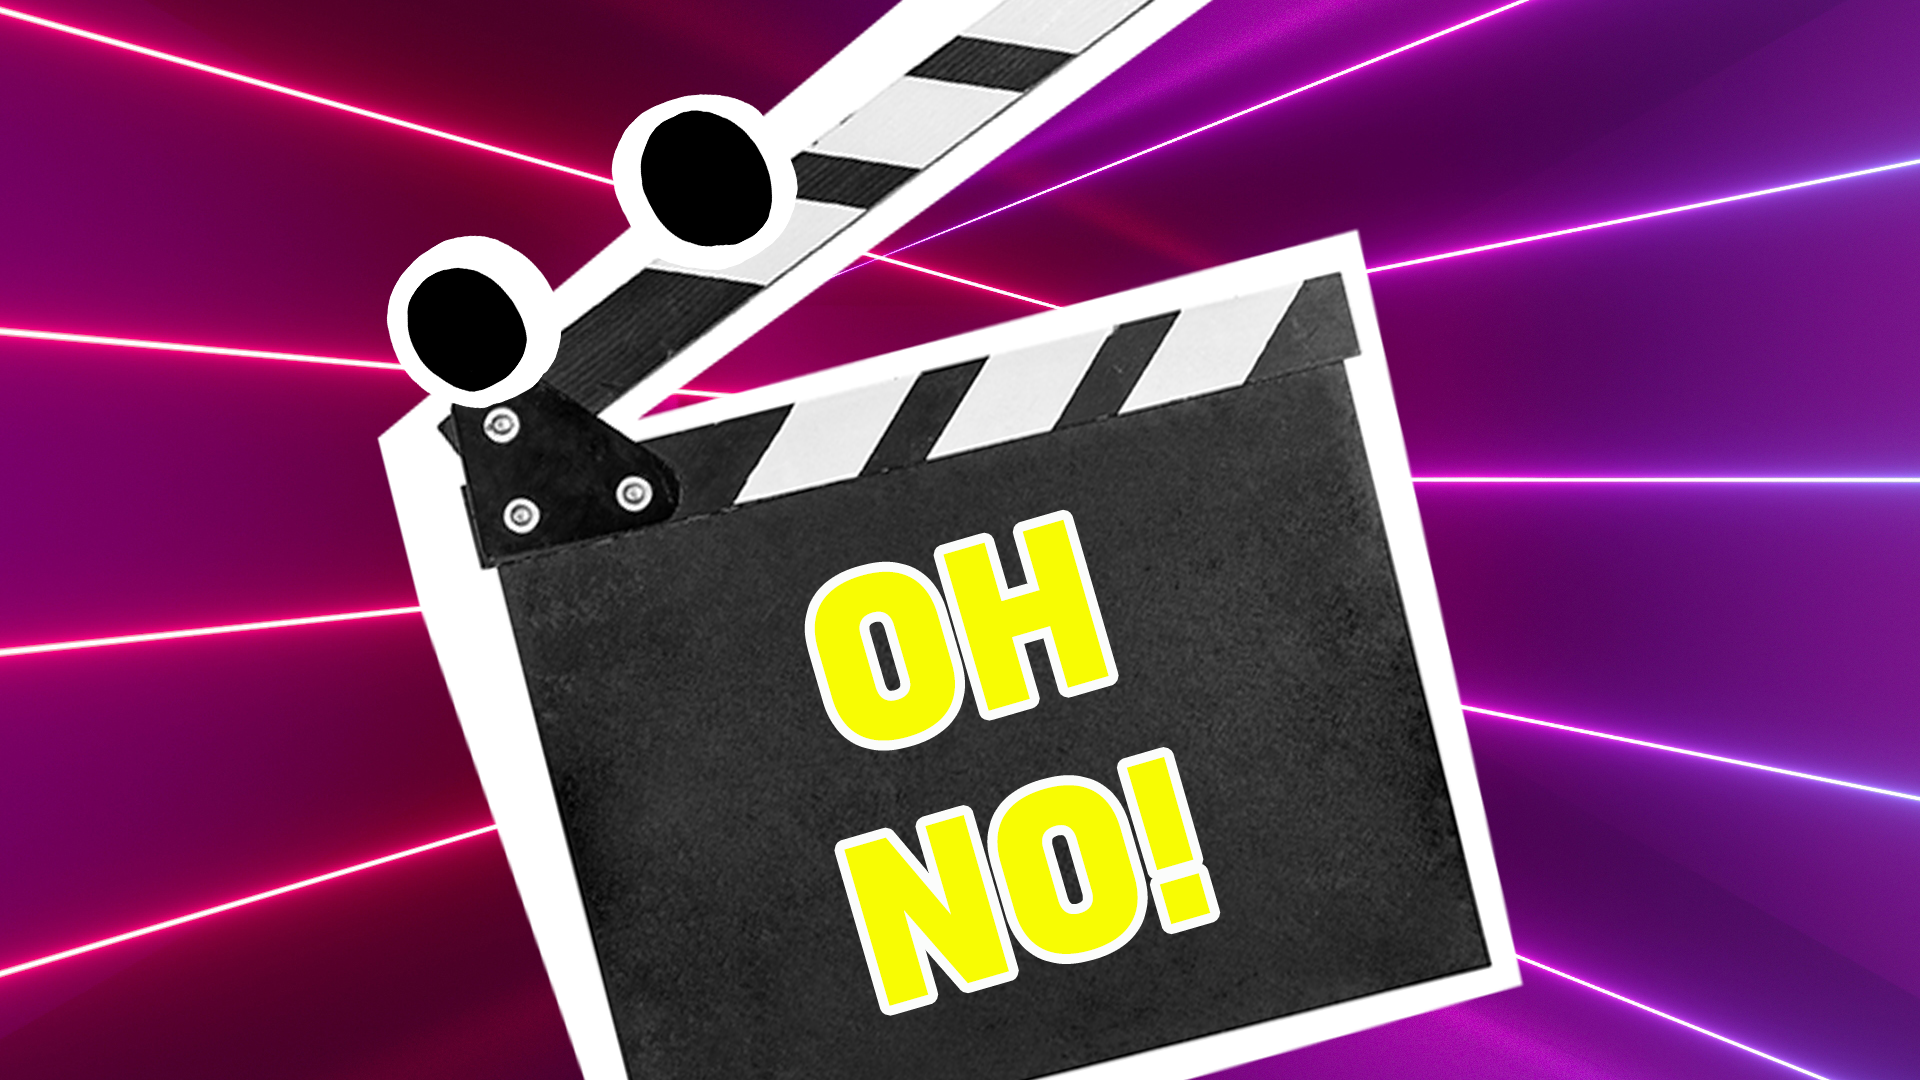 Oh no! Looks like you don't know enough about movies to be crowned king of the film buffs! Have another go!